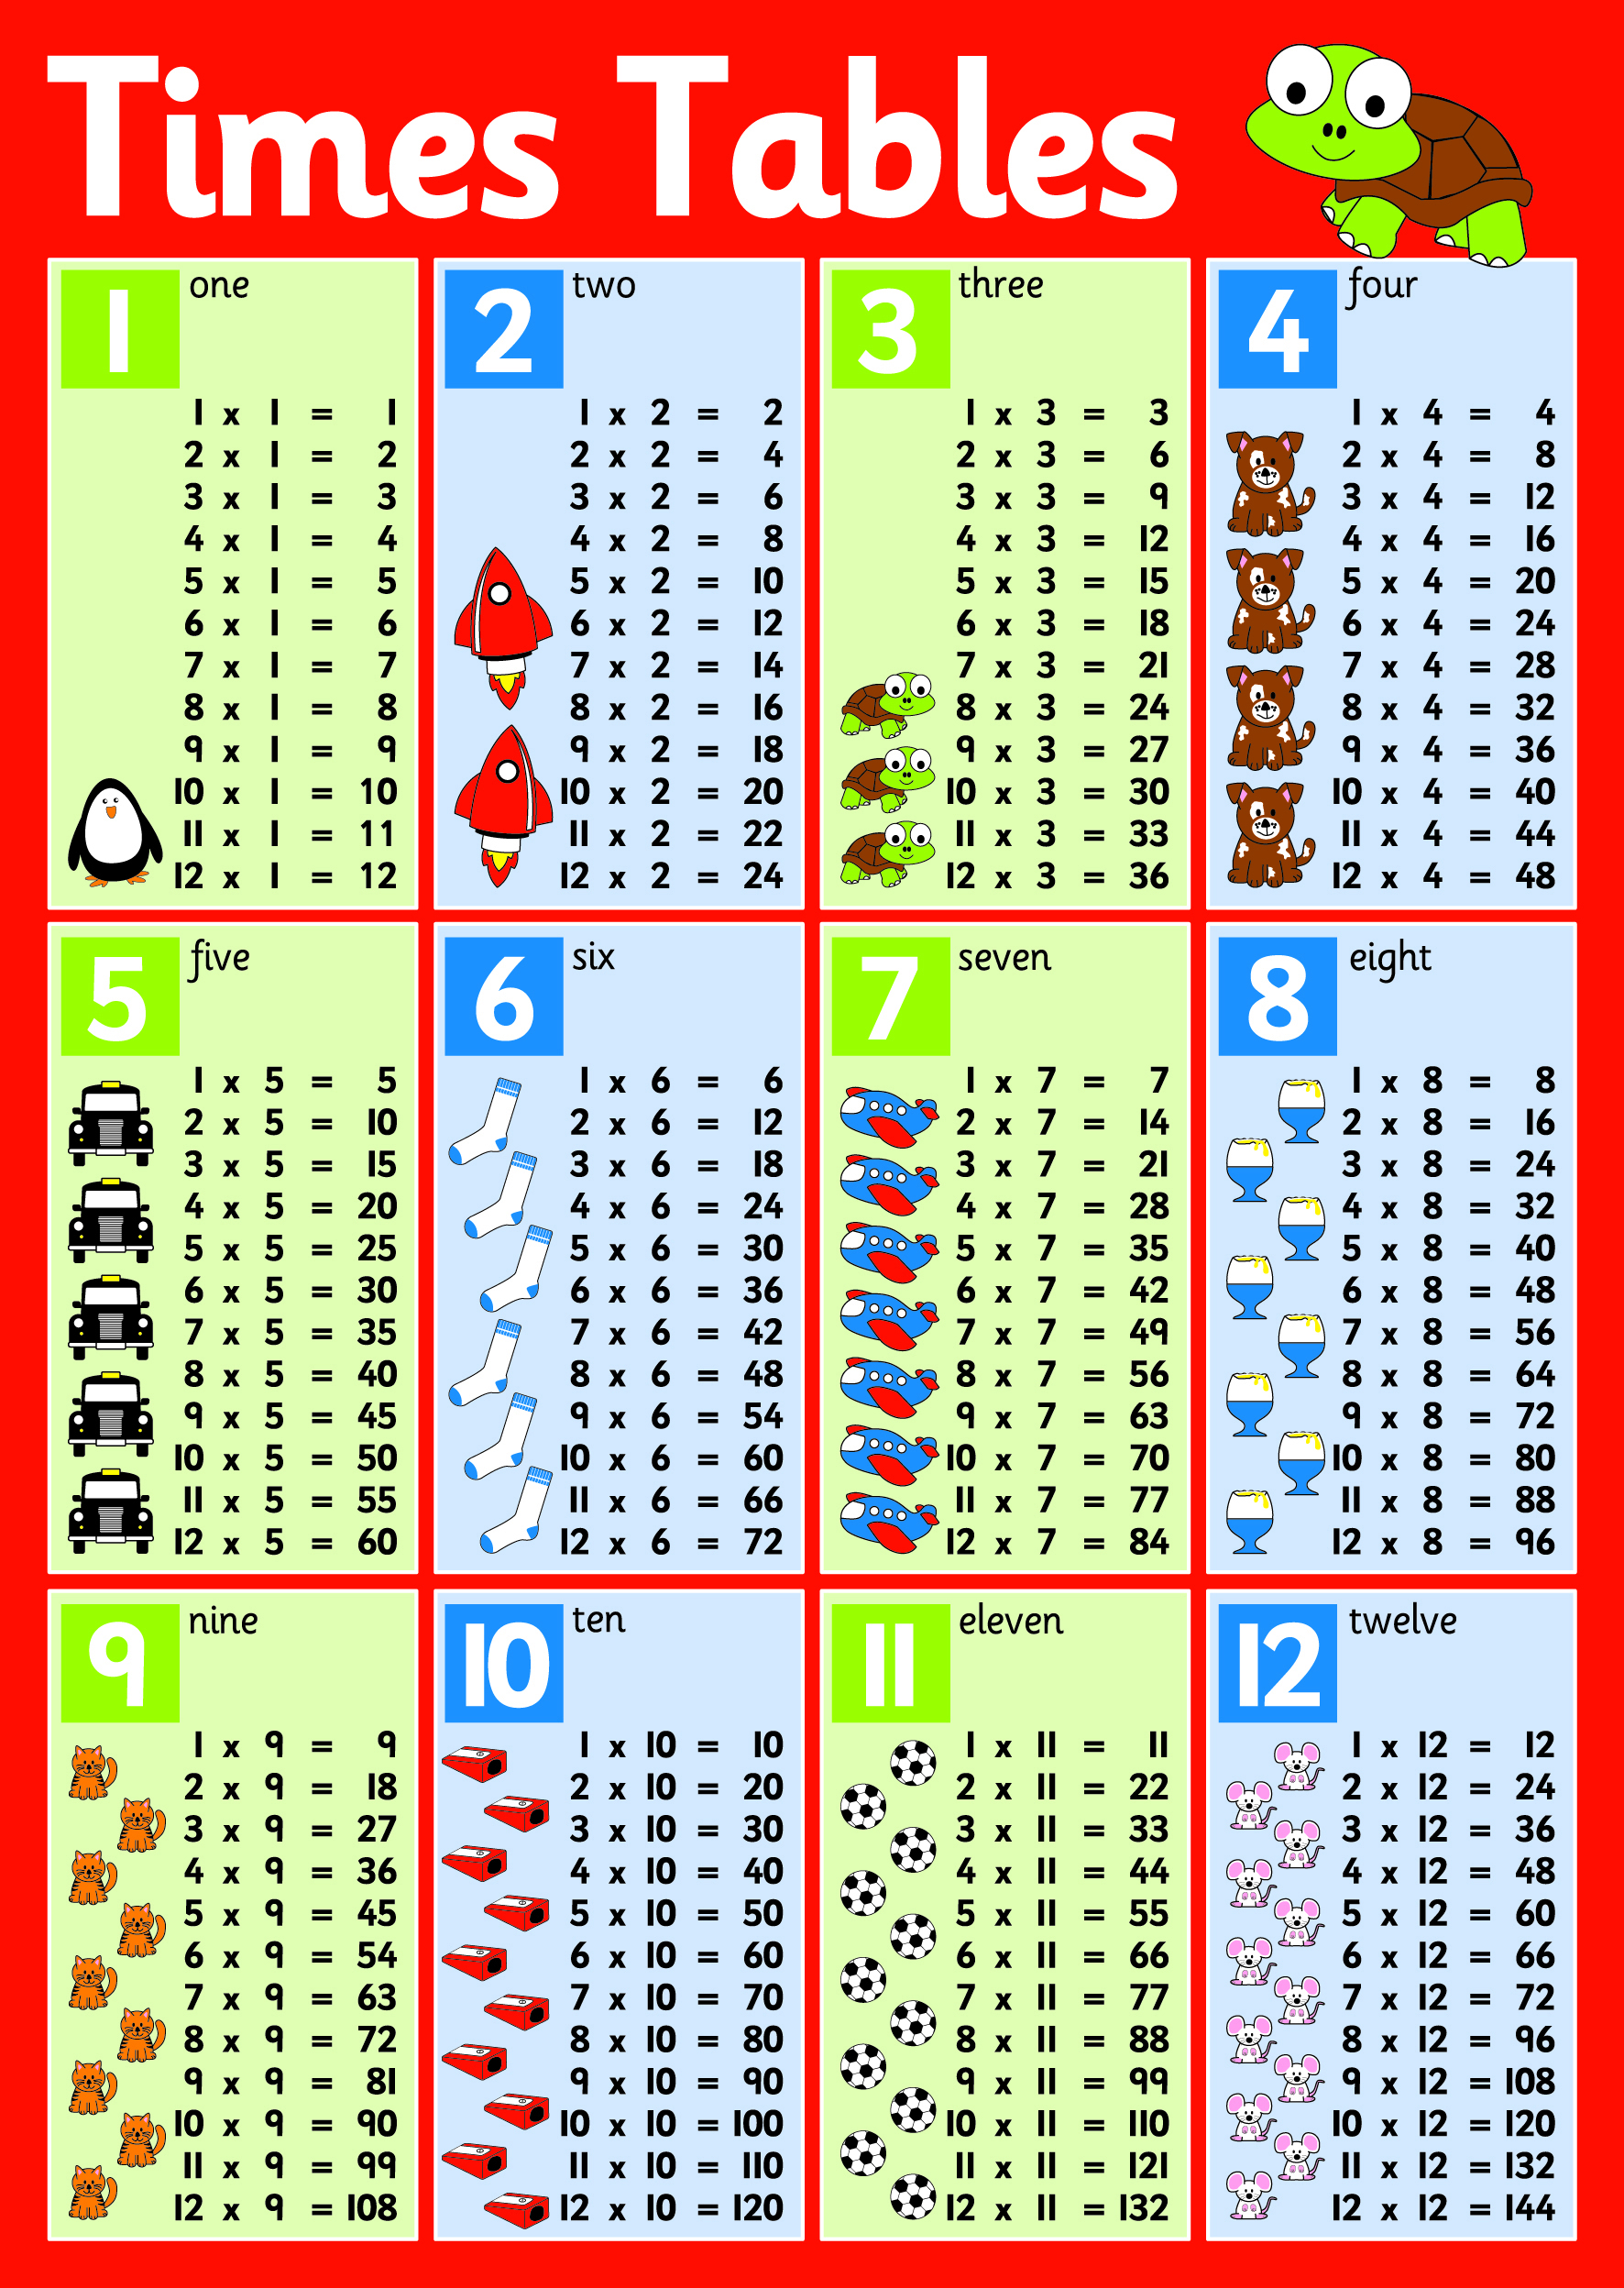 times-table-1-12-poster-spaceright-europe-ltd